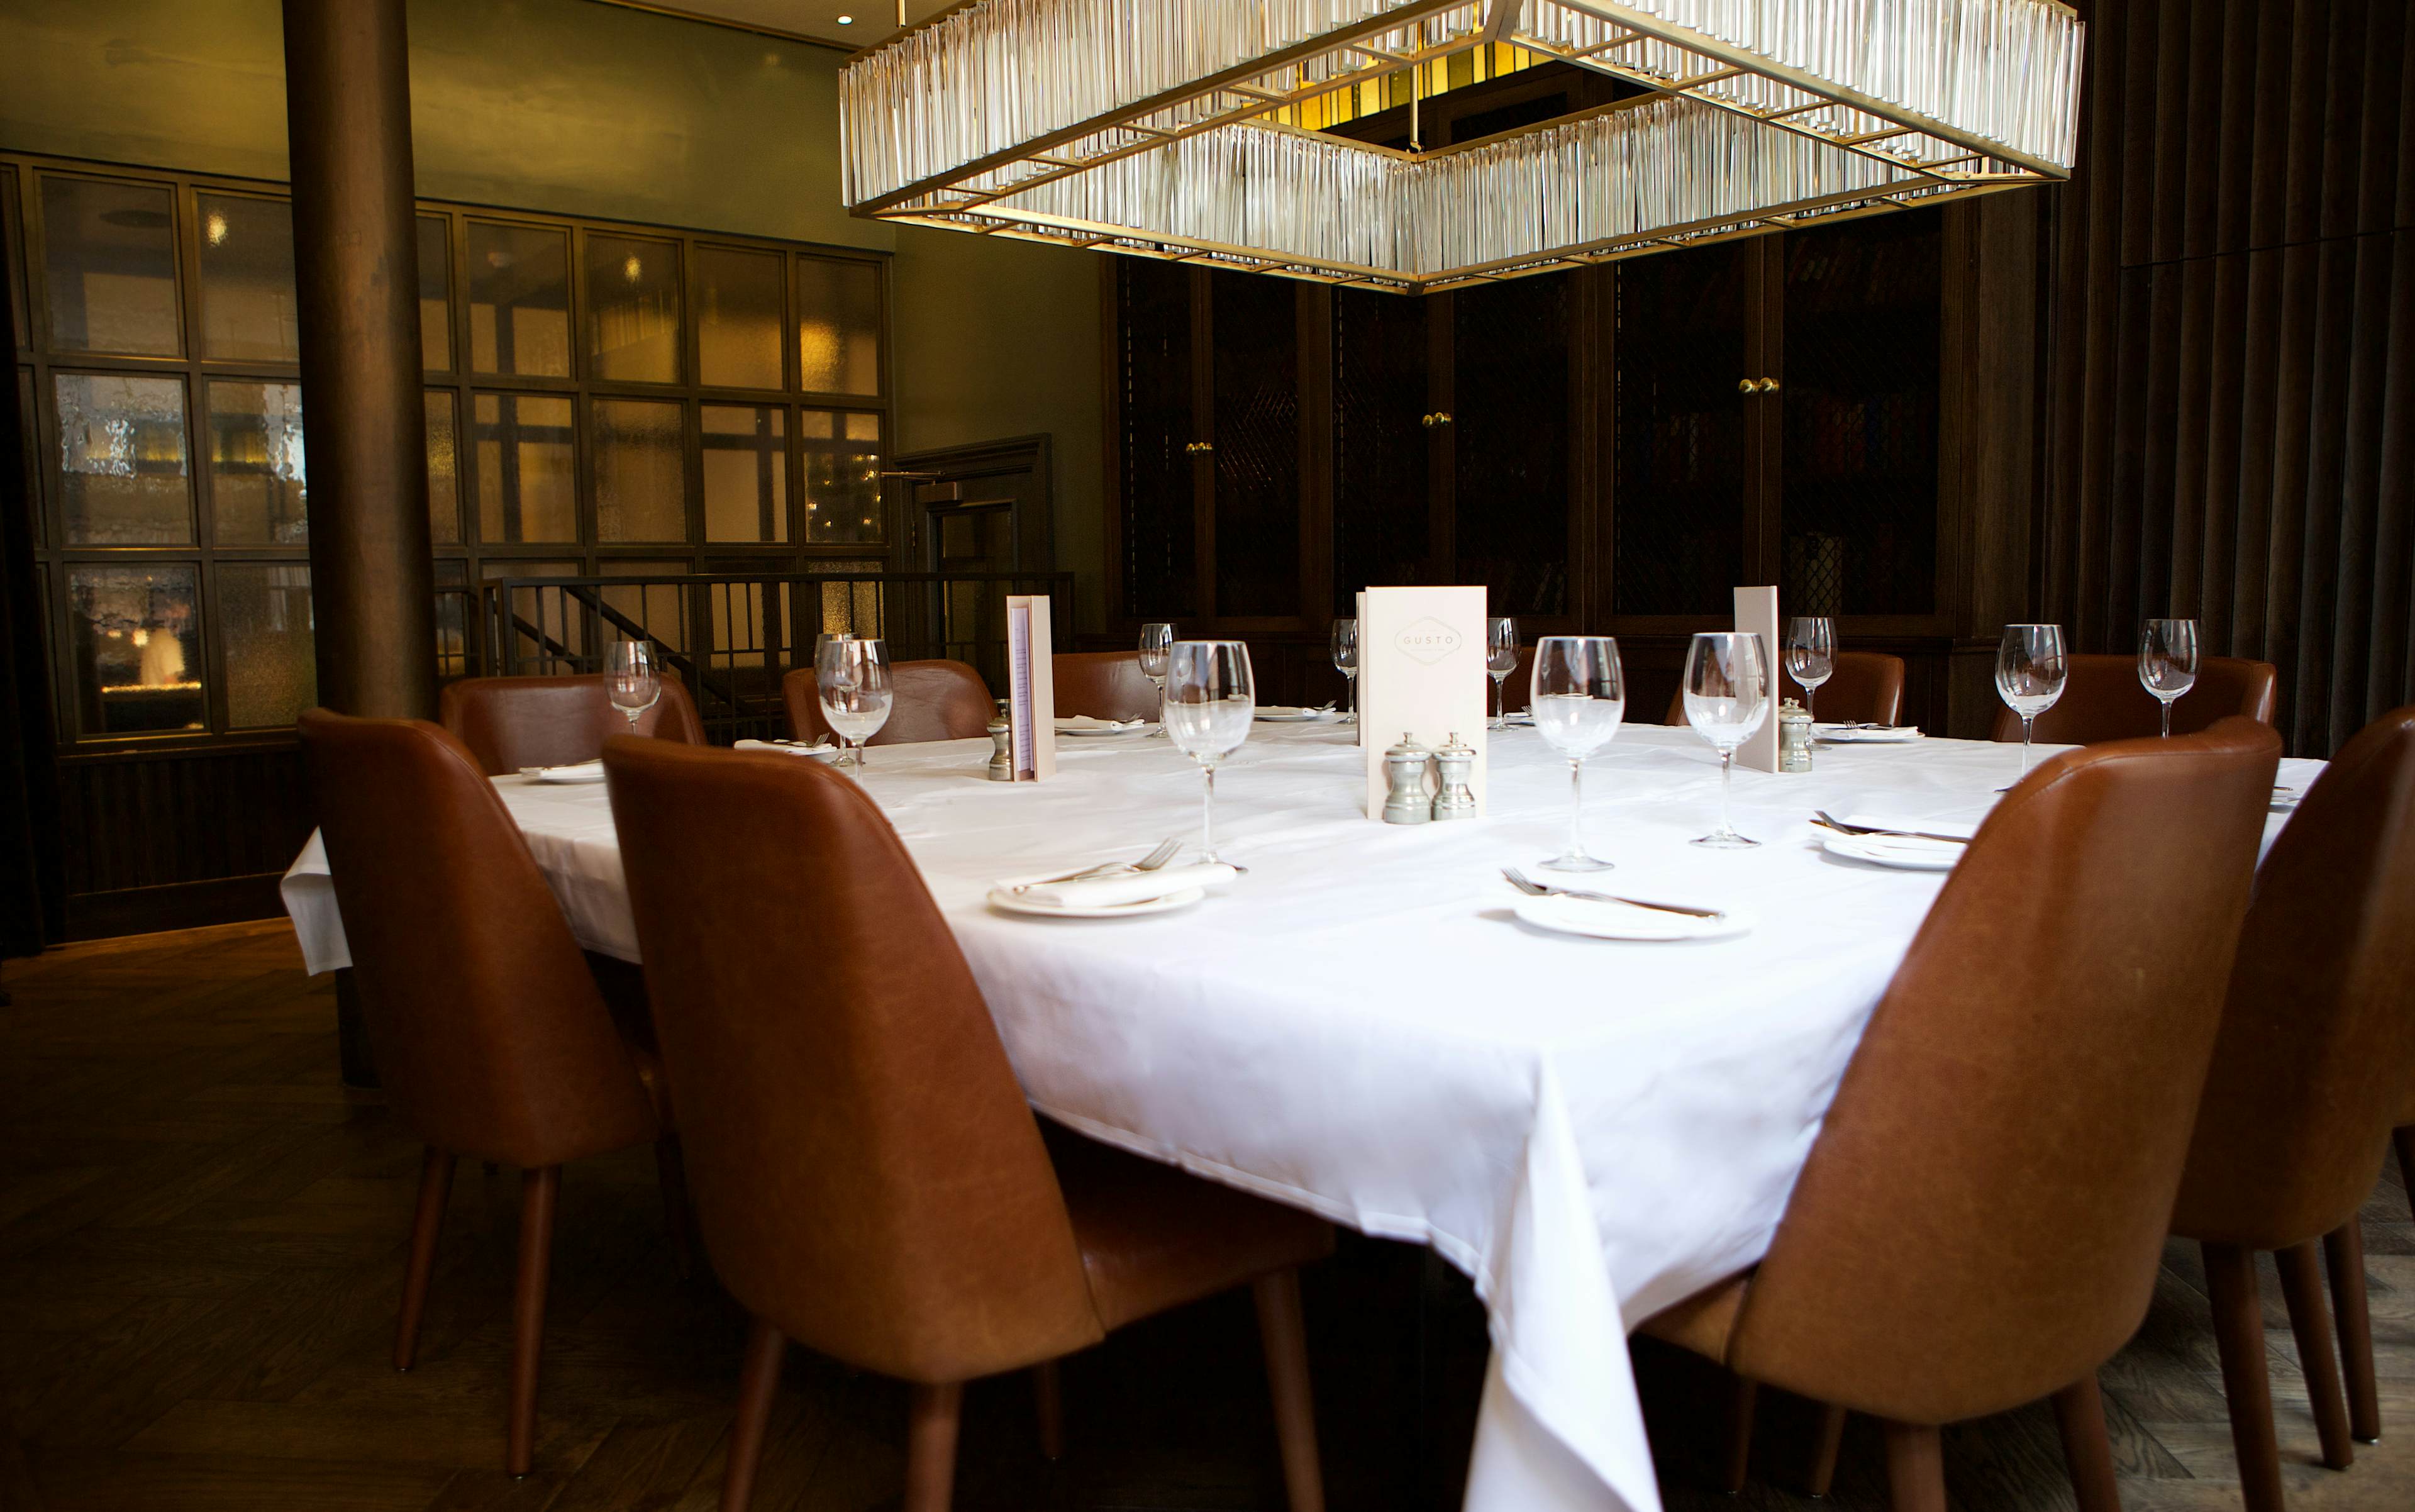 Gusto Restaurant and Bar Manchester - Private Dining Room image 1